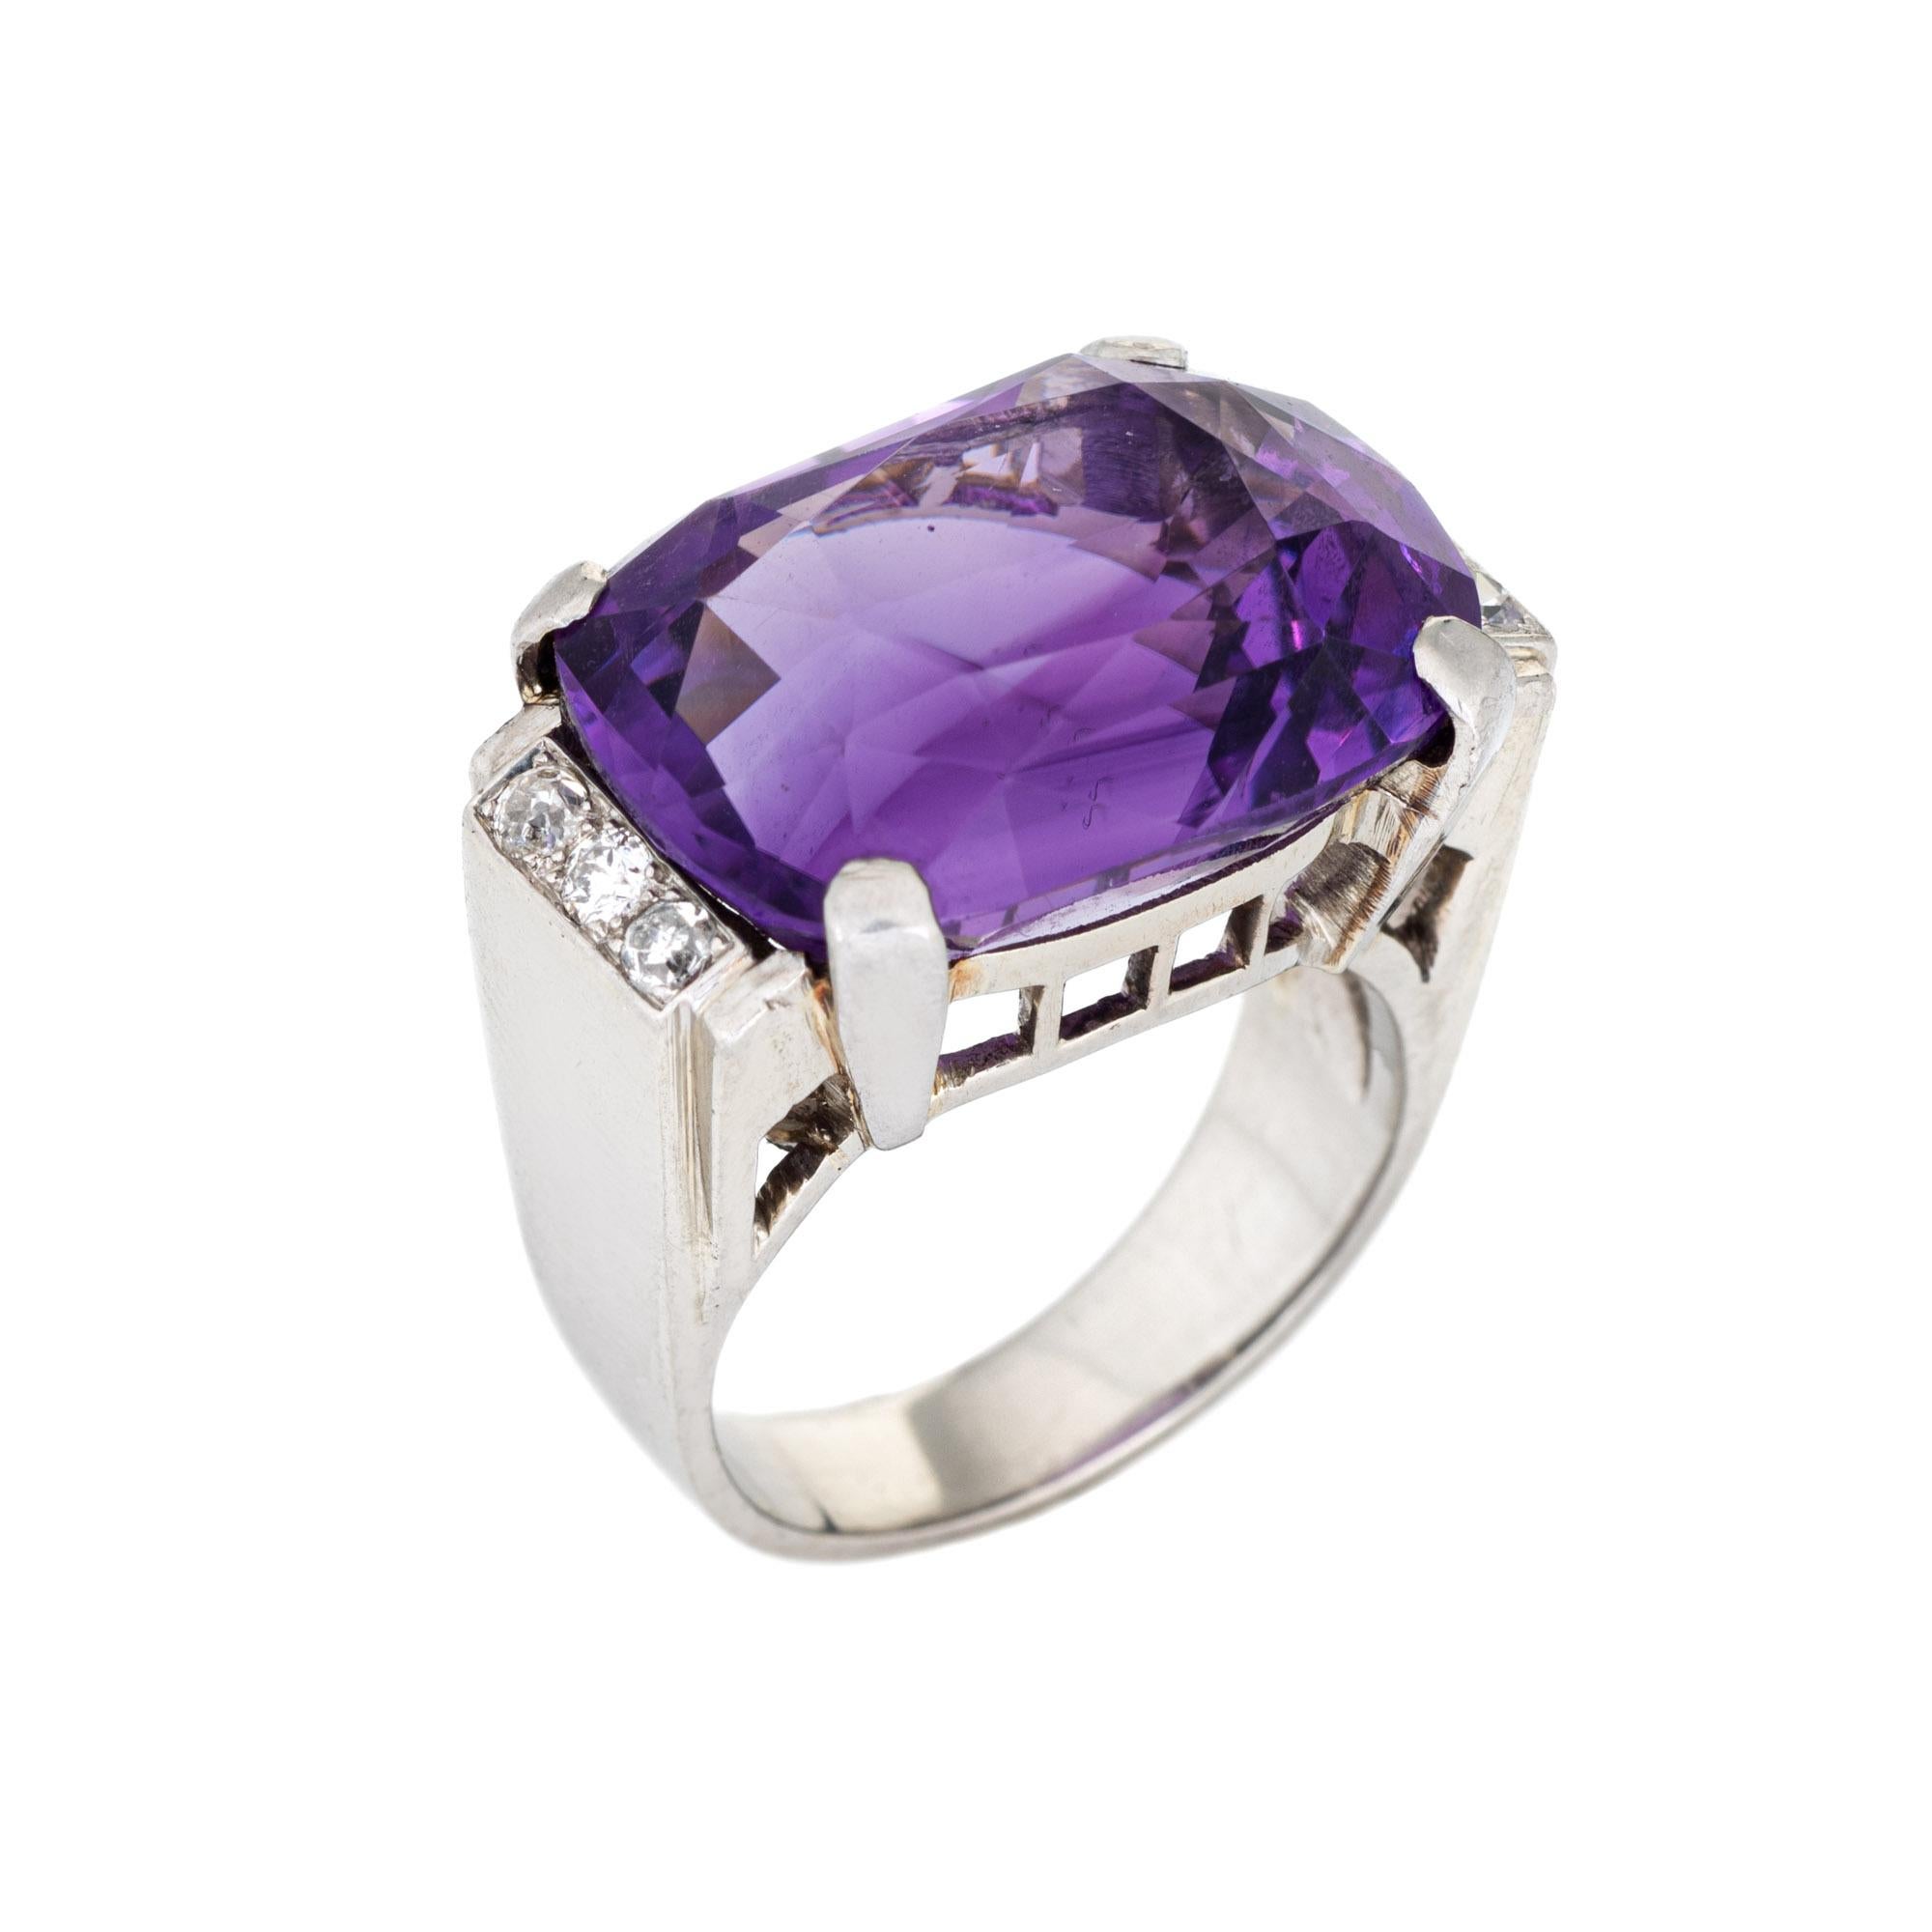 Stylish vintage amethyst & diamond cocktail ring crafted in 14 karat white gold. 

Oval faceted amethyst measures 18mm x 13.5mm. Six diamonds total an estimated 0.12 carats (estimated at H-I color and SI1-I1 clarity). The amethyst is in very good